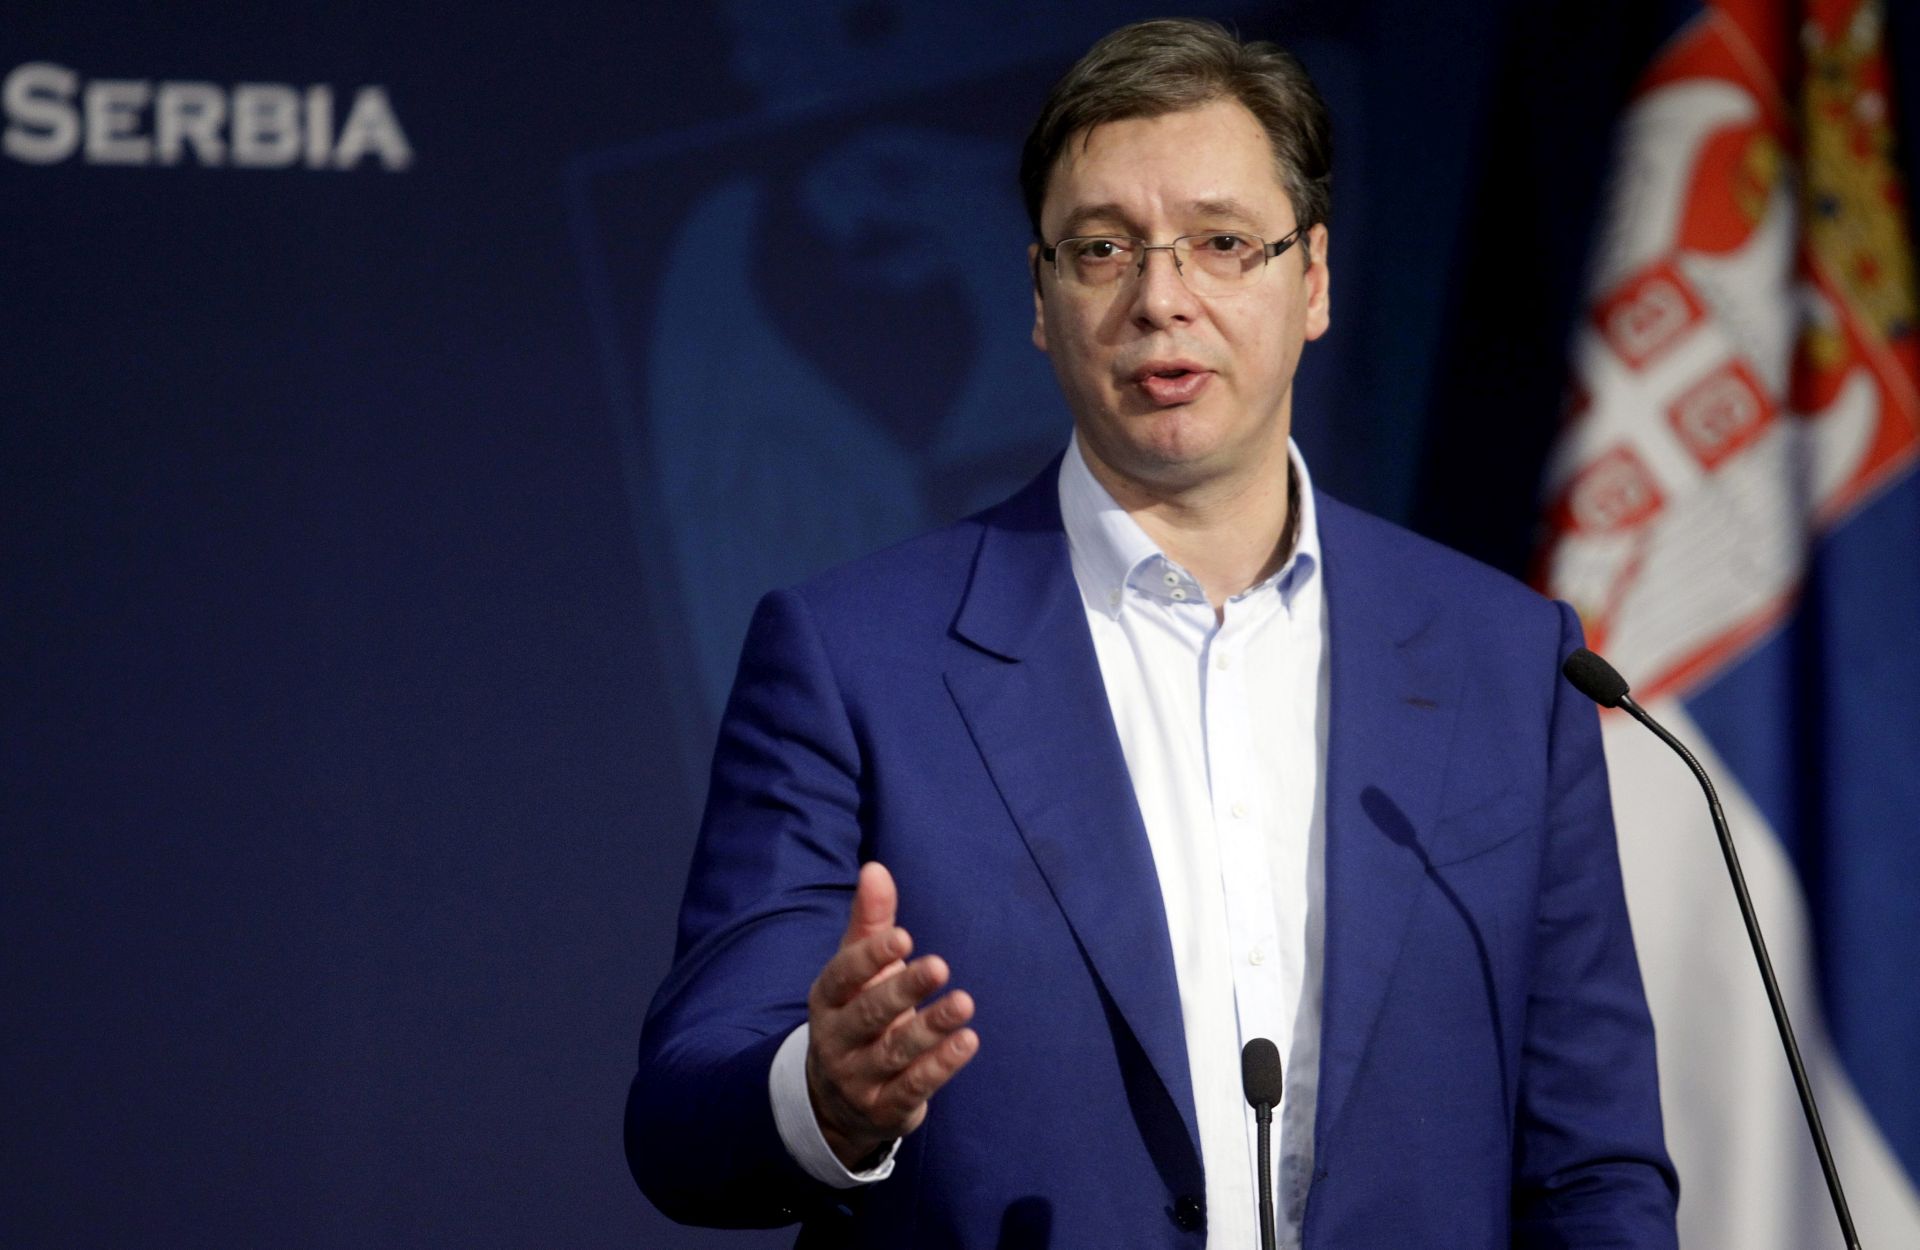 epa05609803 Serbian Prime minister Aleksandar Vucic addresses the media in Belgrade, Serbia, 30 October 2016. On 29 October 2016 Serbian Interior minister Nebojsa Stevanovic said that the security of the Prime minister Vucic was tightened because of the large quantity of weapons was found near a location of his family home near Belgrade.  EPA/KOCA SULEJMANOVIC